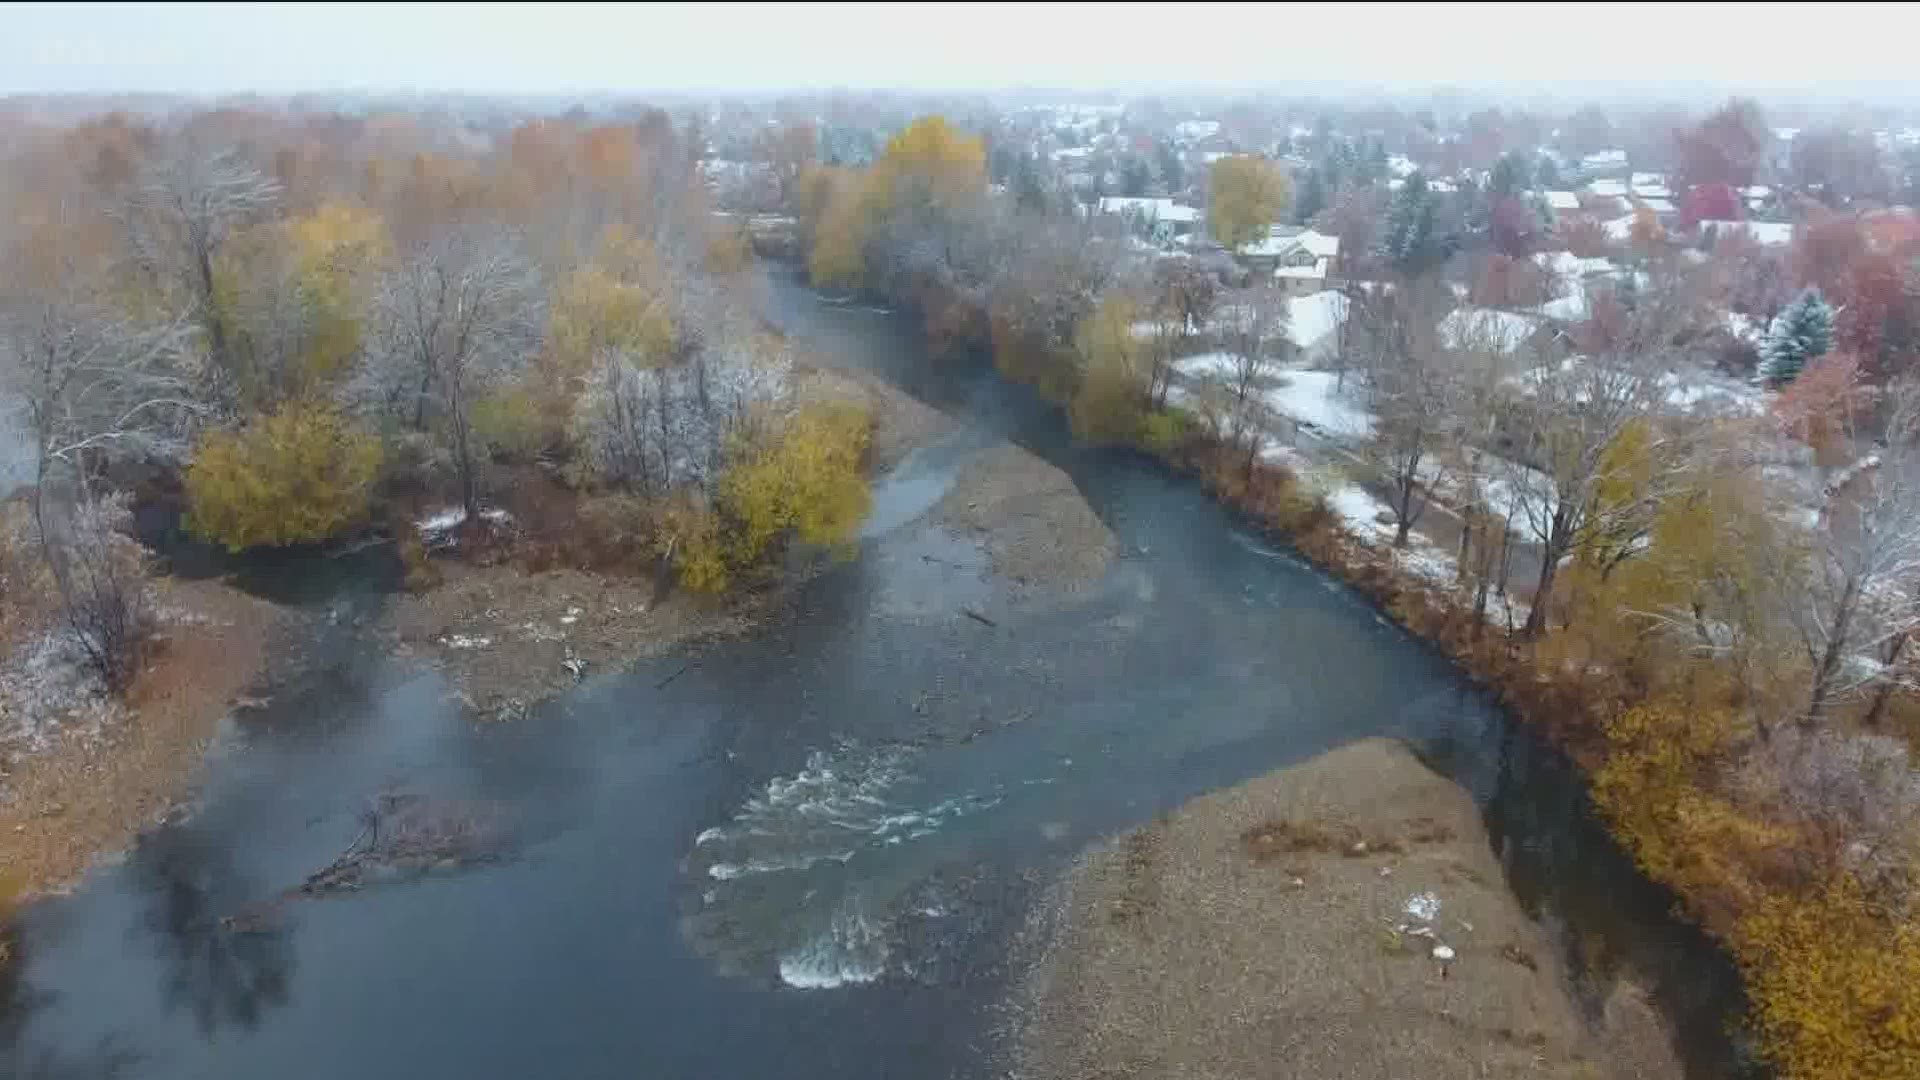 Enjoy a peaceful view above the Boise River on a snowy Sunday